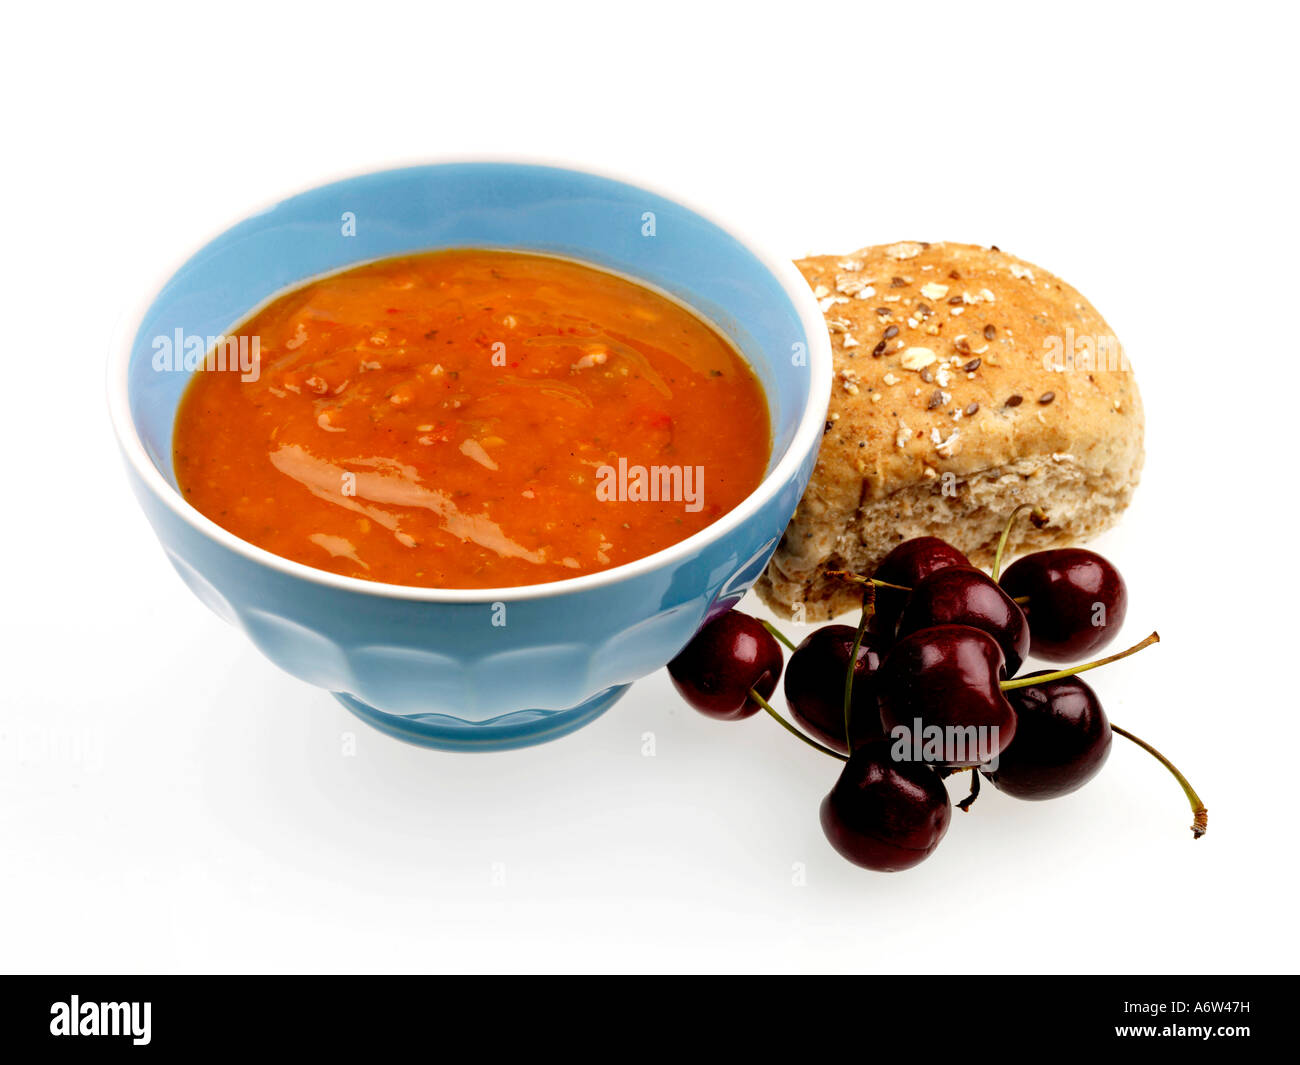 Tomato and Lentil Soup Stock Photo